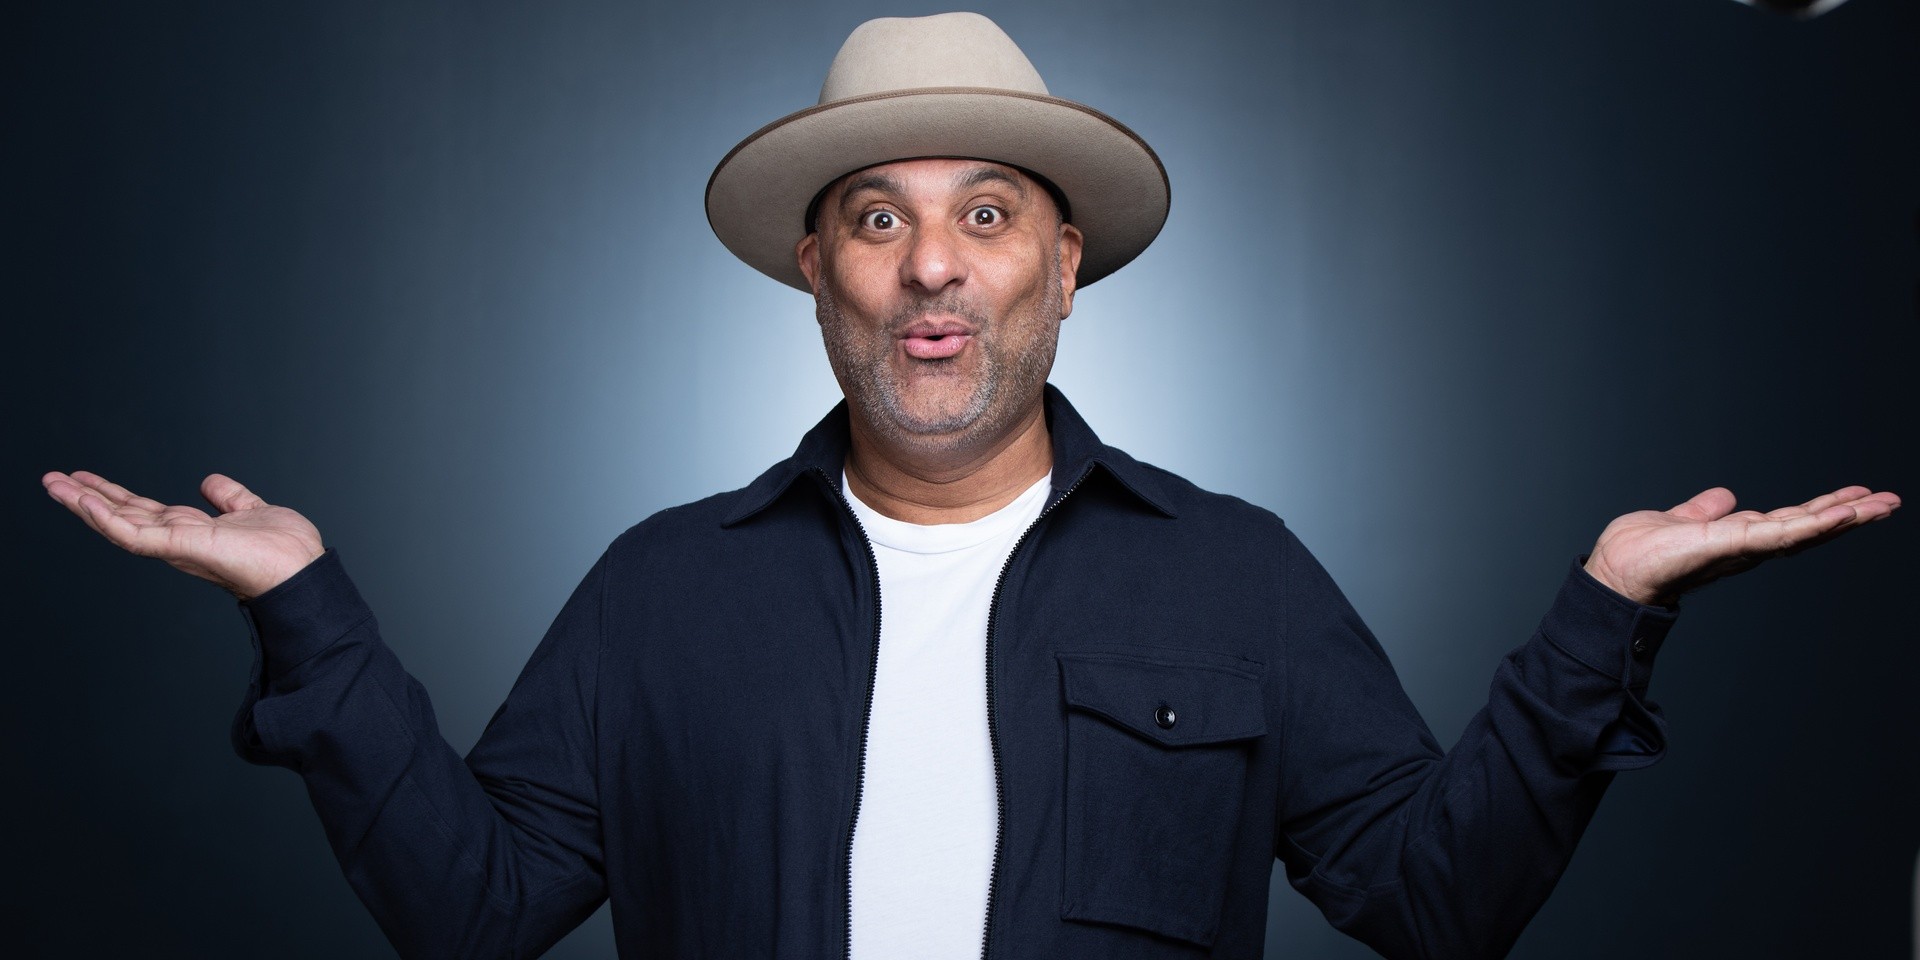 Russell Peters to bring 'ACT YOUR AGE' tour to Singapore and Kuala Lumpur